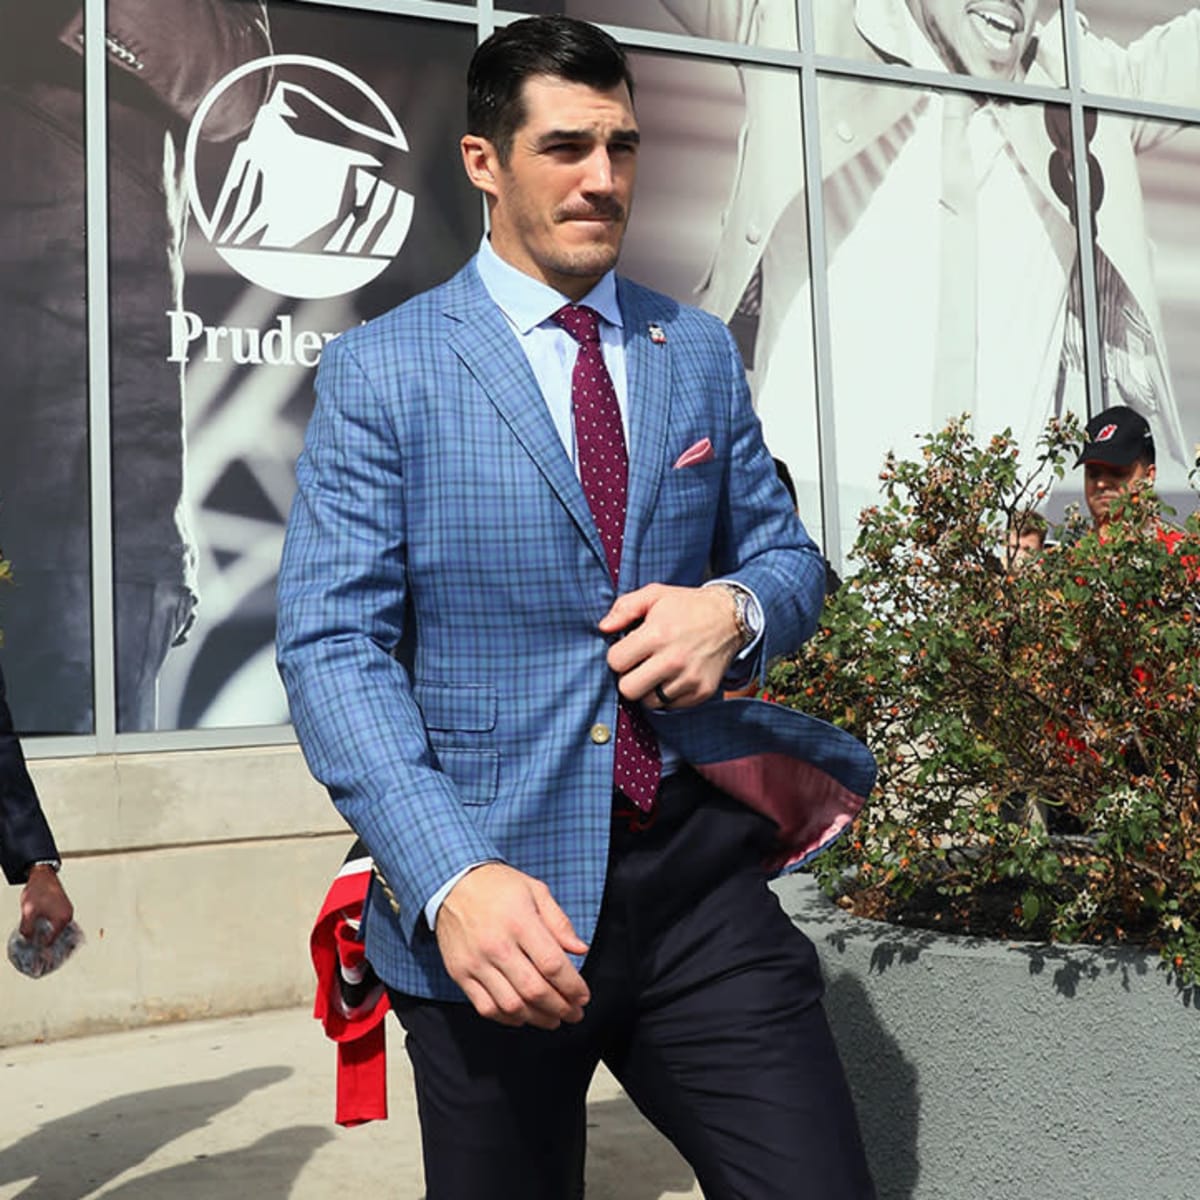 NHL playoffs: Devils' Brian Boyle appears to threaten Lightning player